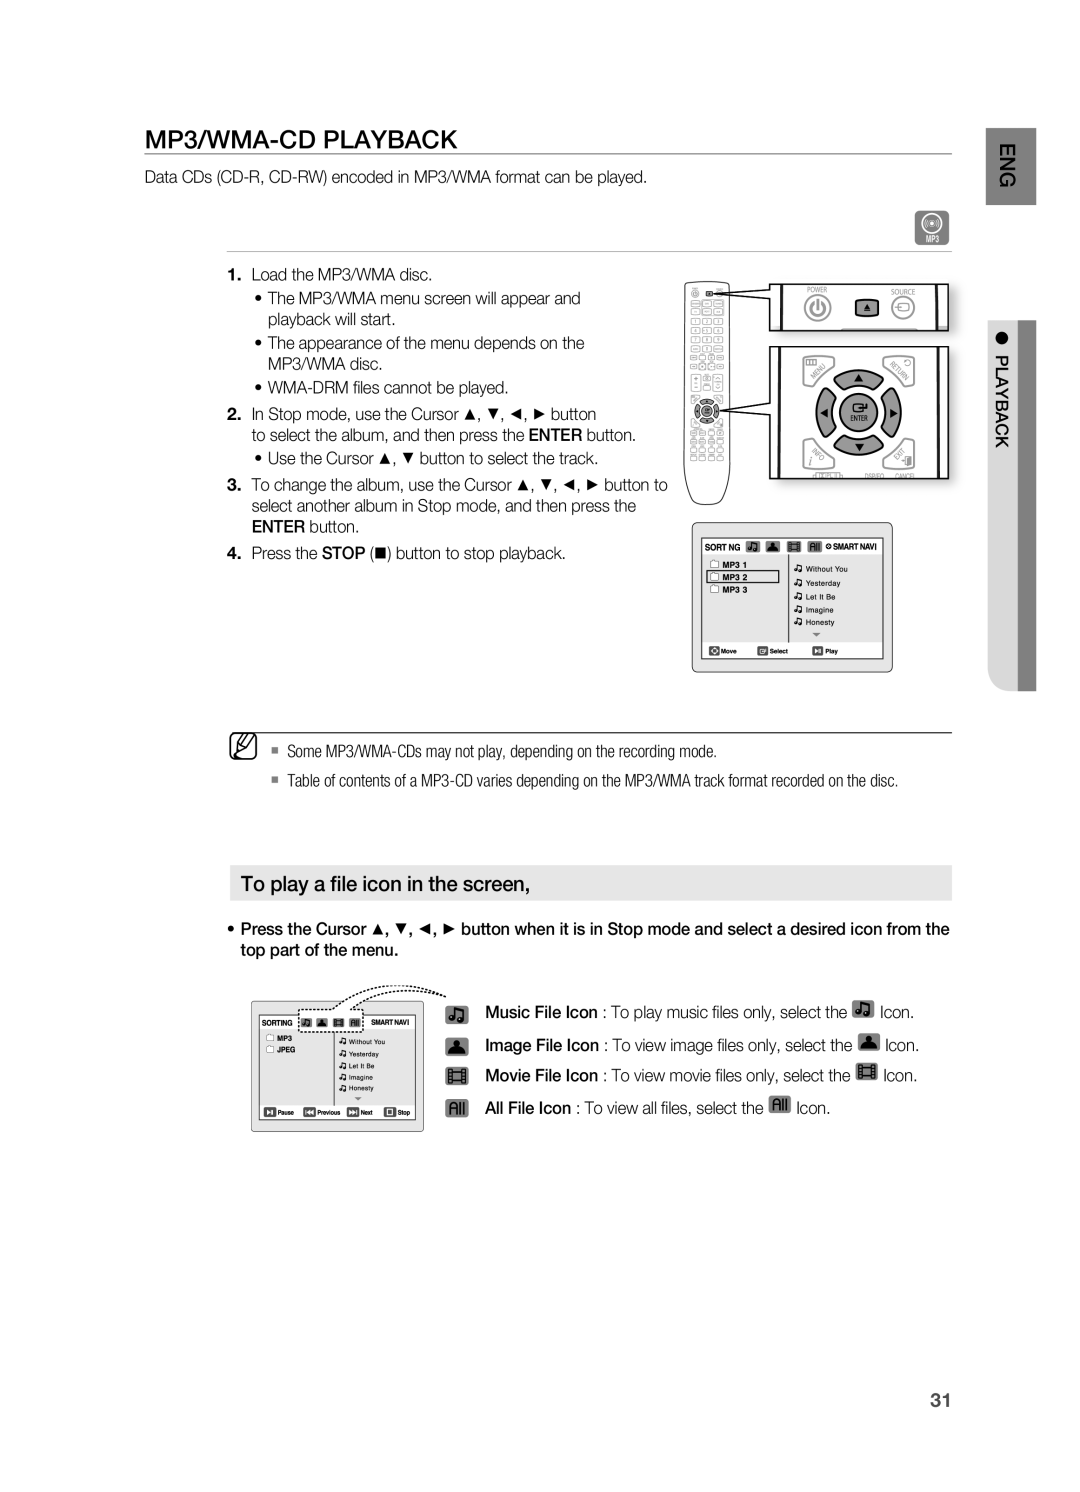 Samsung HT-X725G, HT-TX725G user manual MP3/WMA-CDPLAYBACK, To play a file icon in the screen 